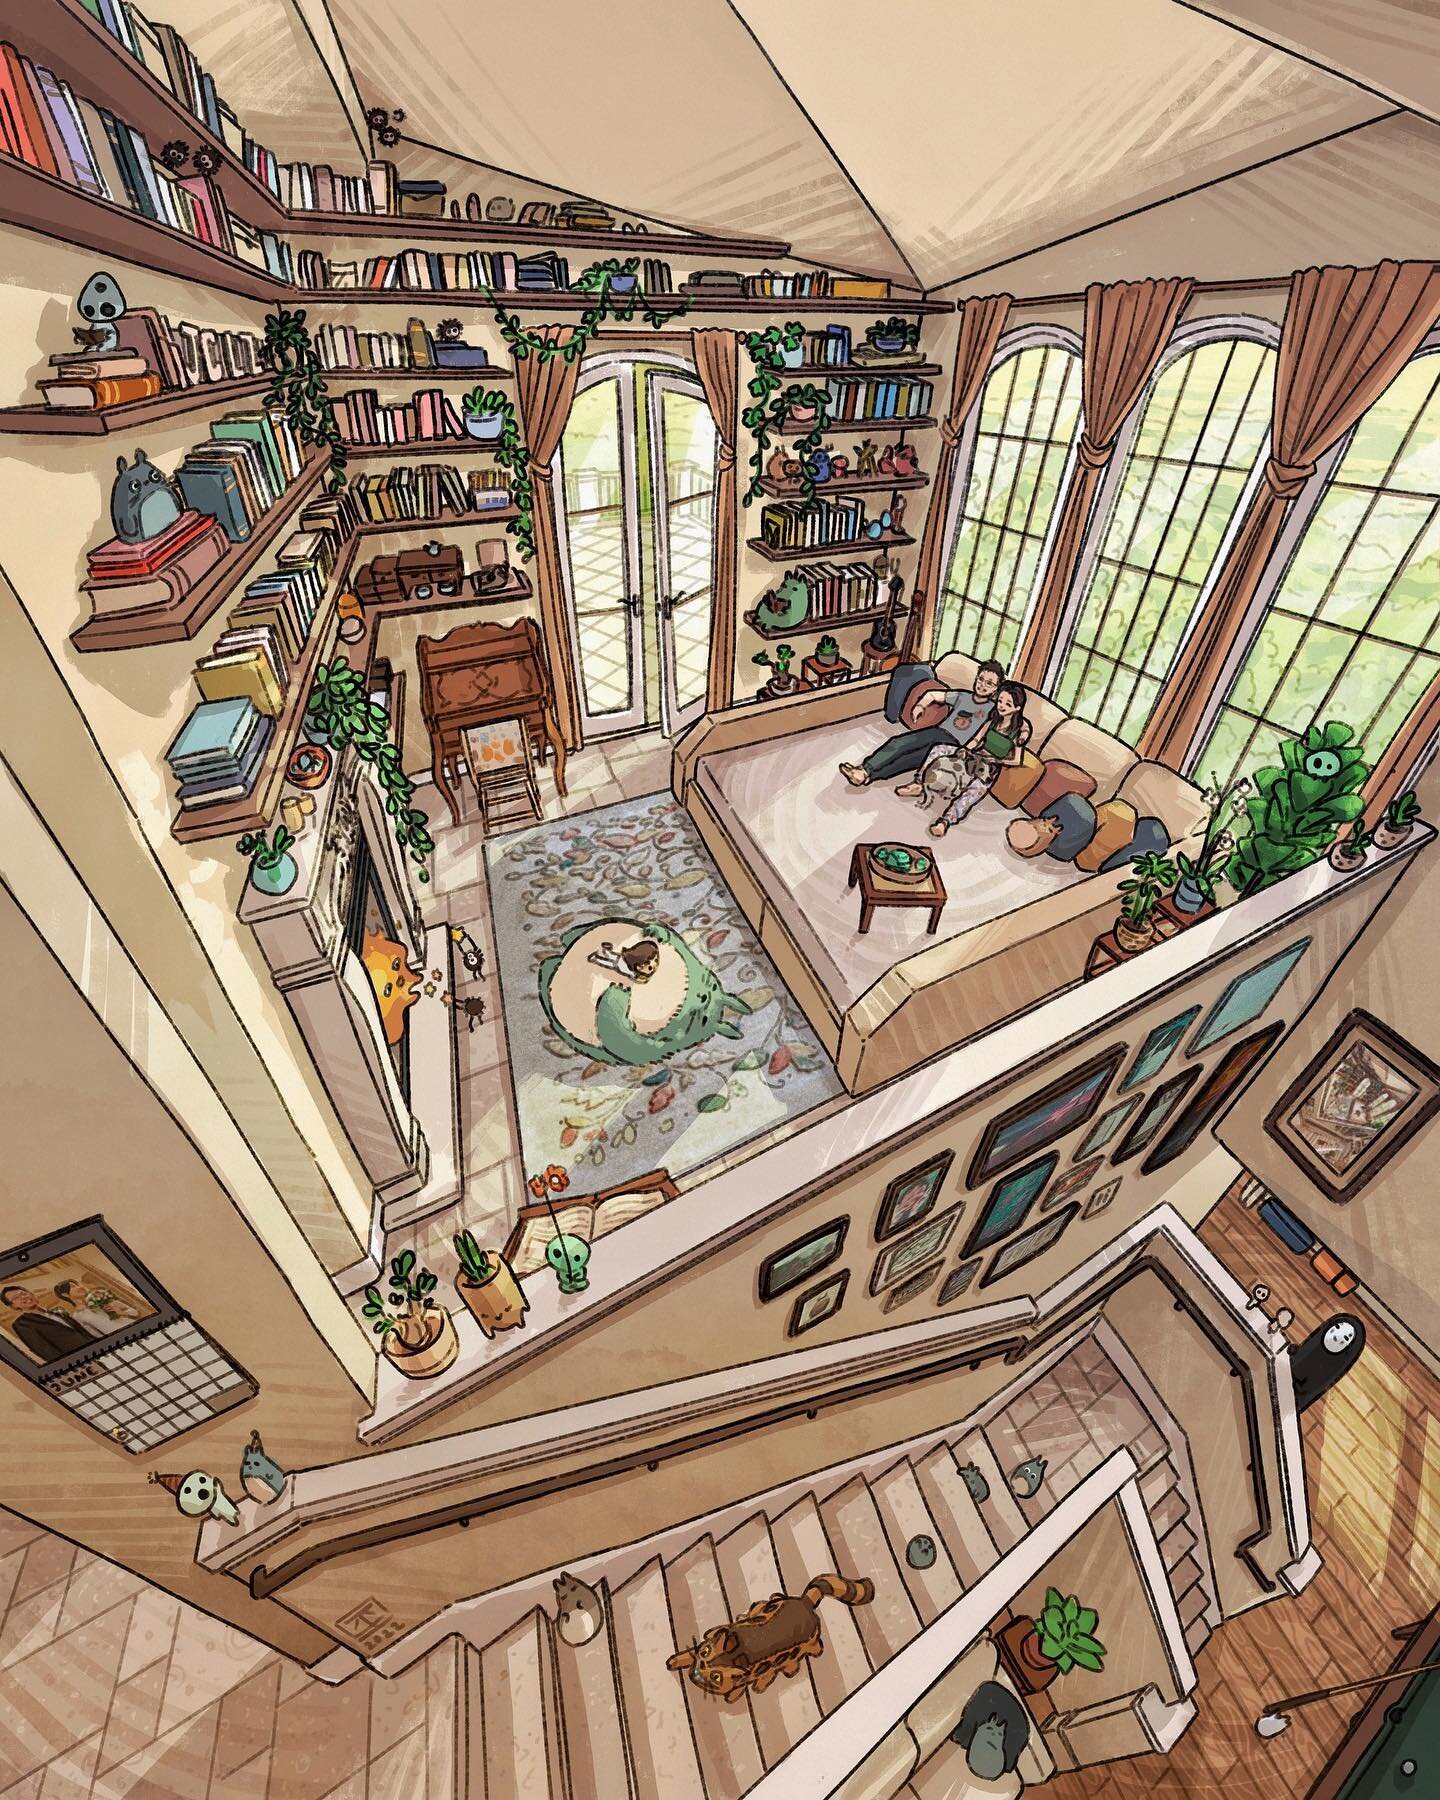 Sunny Library, 2022 &mdash; Absolute love the lighting and windows for this commission 🌞 Their home actually looks like this too &mdash; scroll to the end to see the painting irl :)

Also: long time no post &mdash; been making some big life transiti